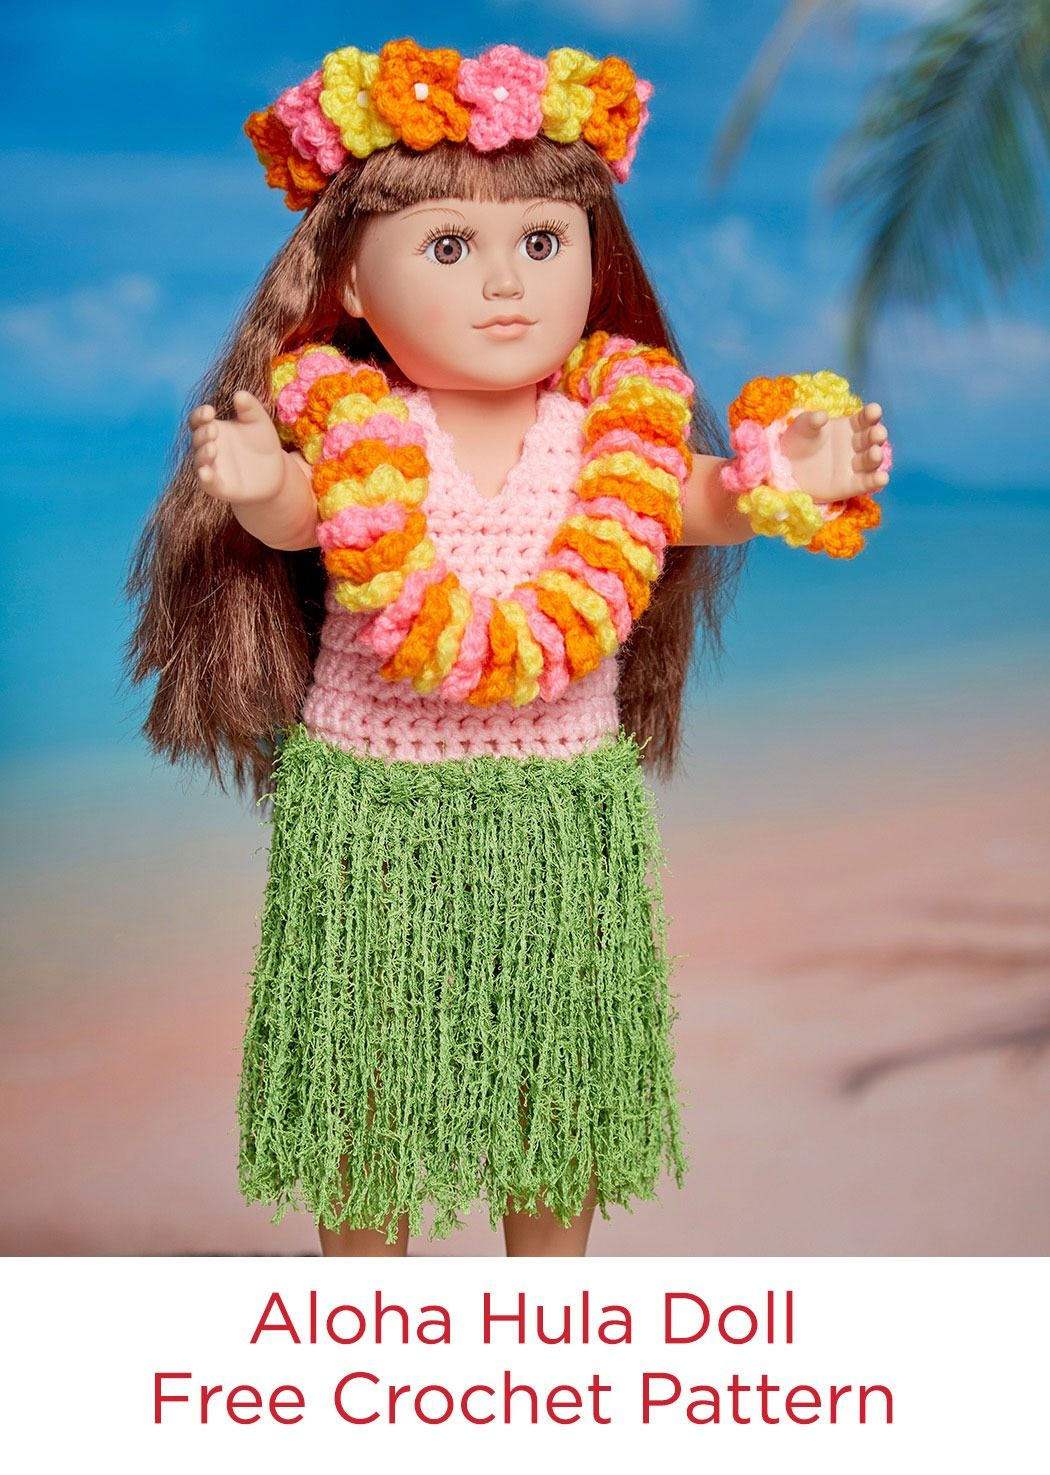 Free Crochet Patterns For American Girl Doll Aloha Hula Doll Free Crochet Pattern In Red Heart Yarns New New